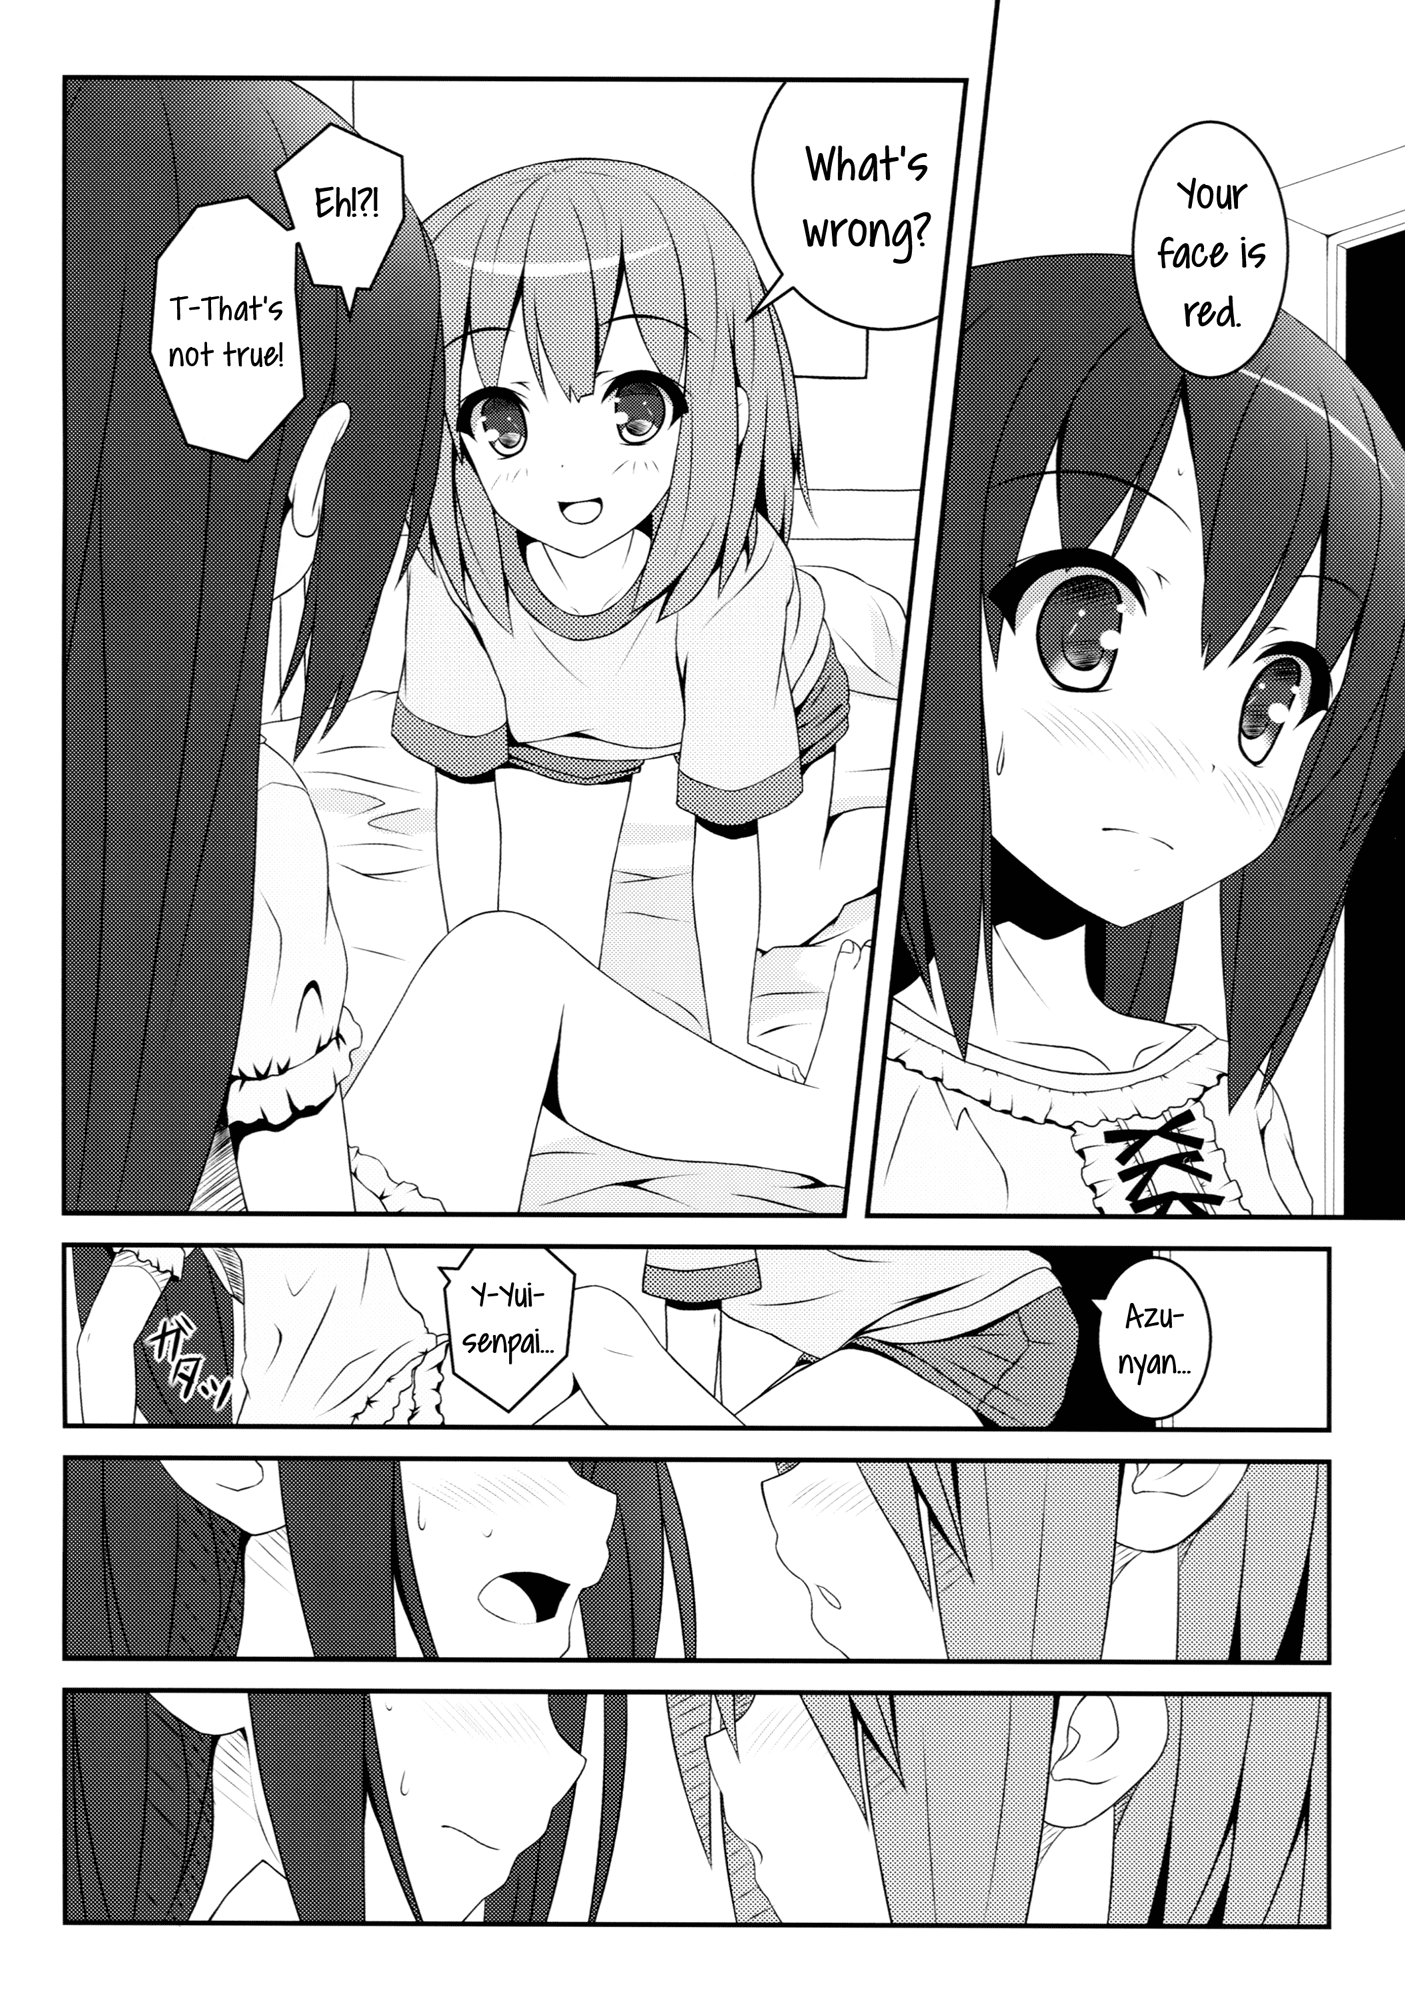 Magic for Nighttime Only hentai manga picture 3